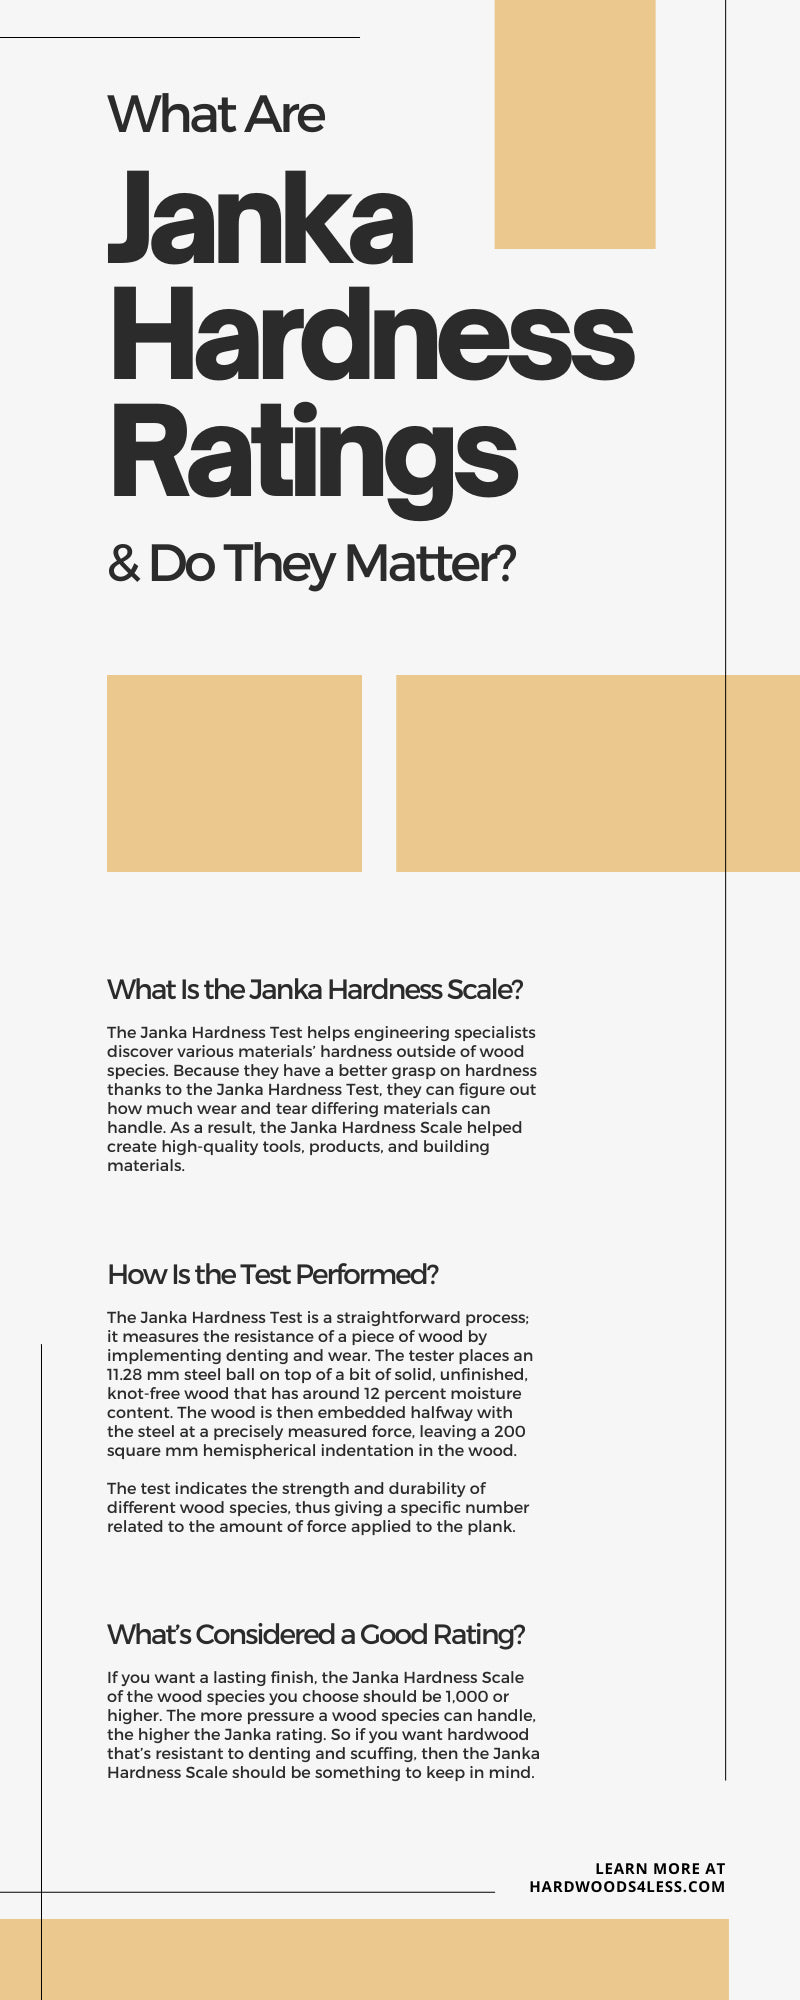 What Are Janka Hardness Ratings & Do They Matter?